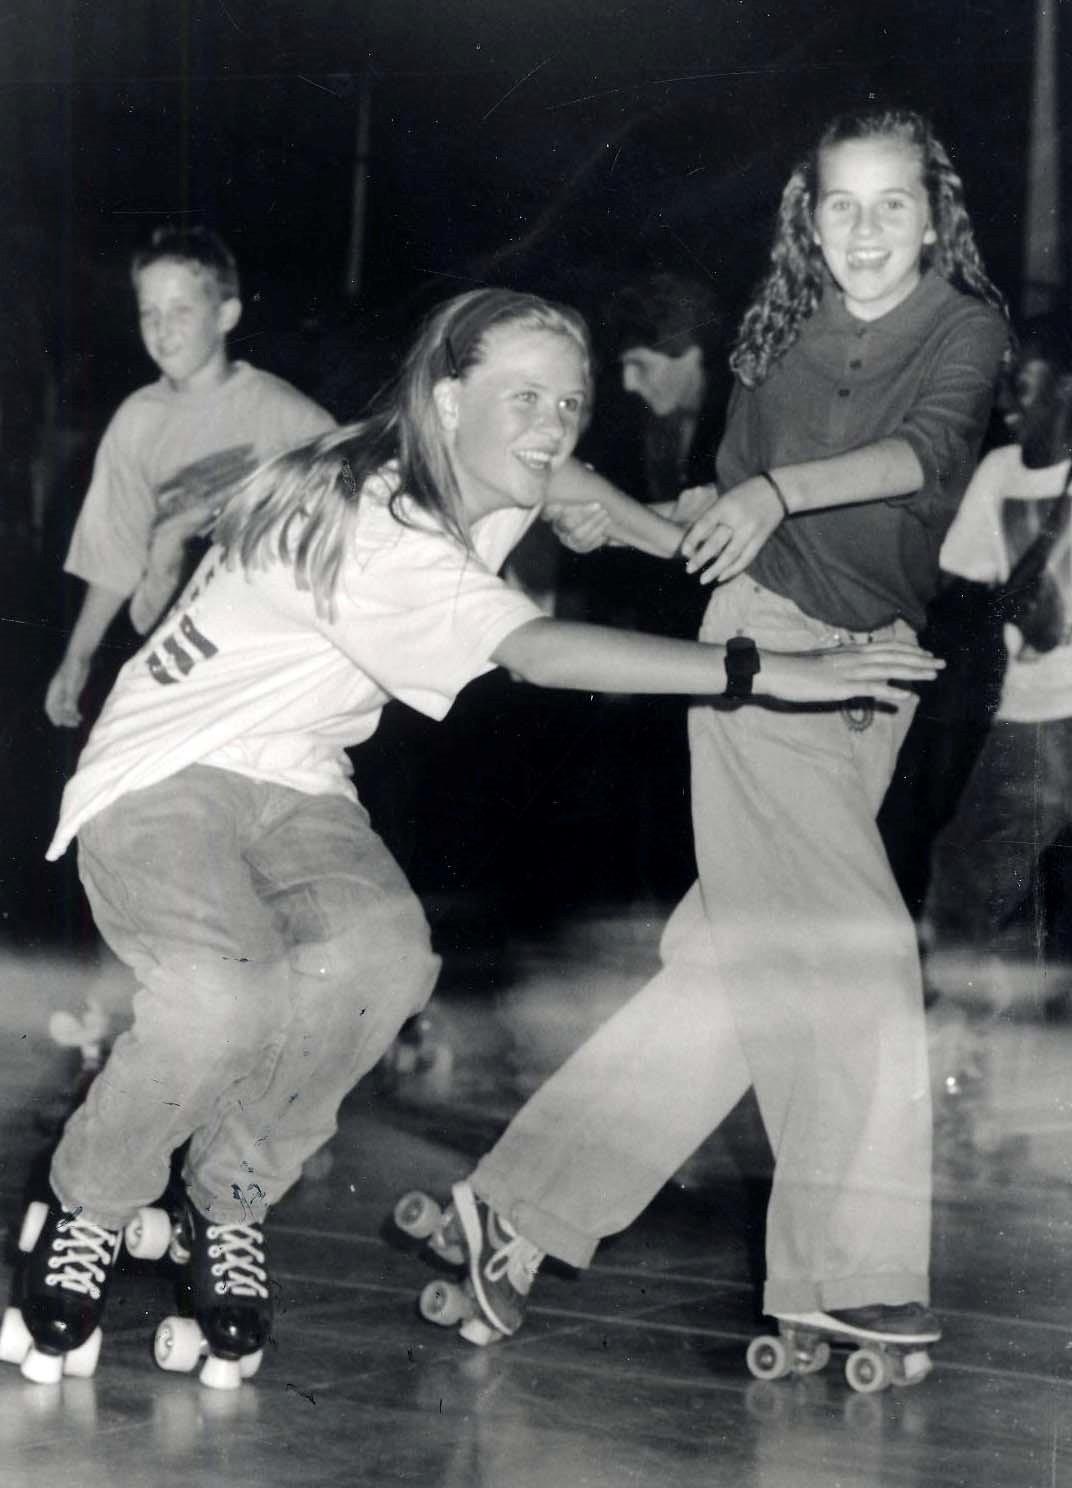 Perdiswell Leisure Centre - A roller disco in 1991